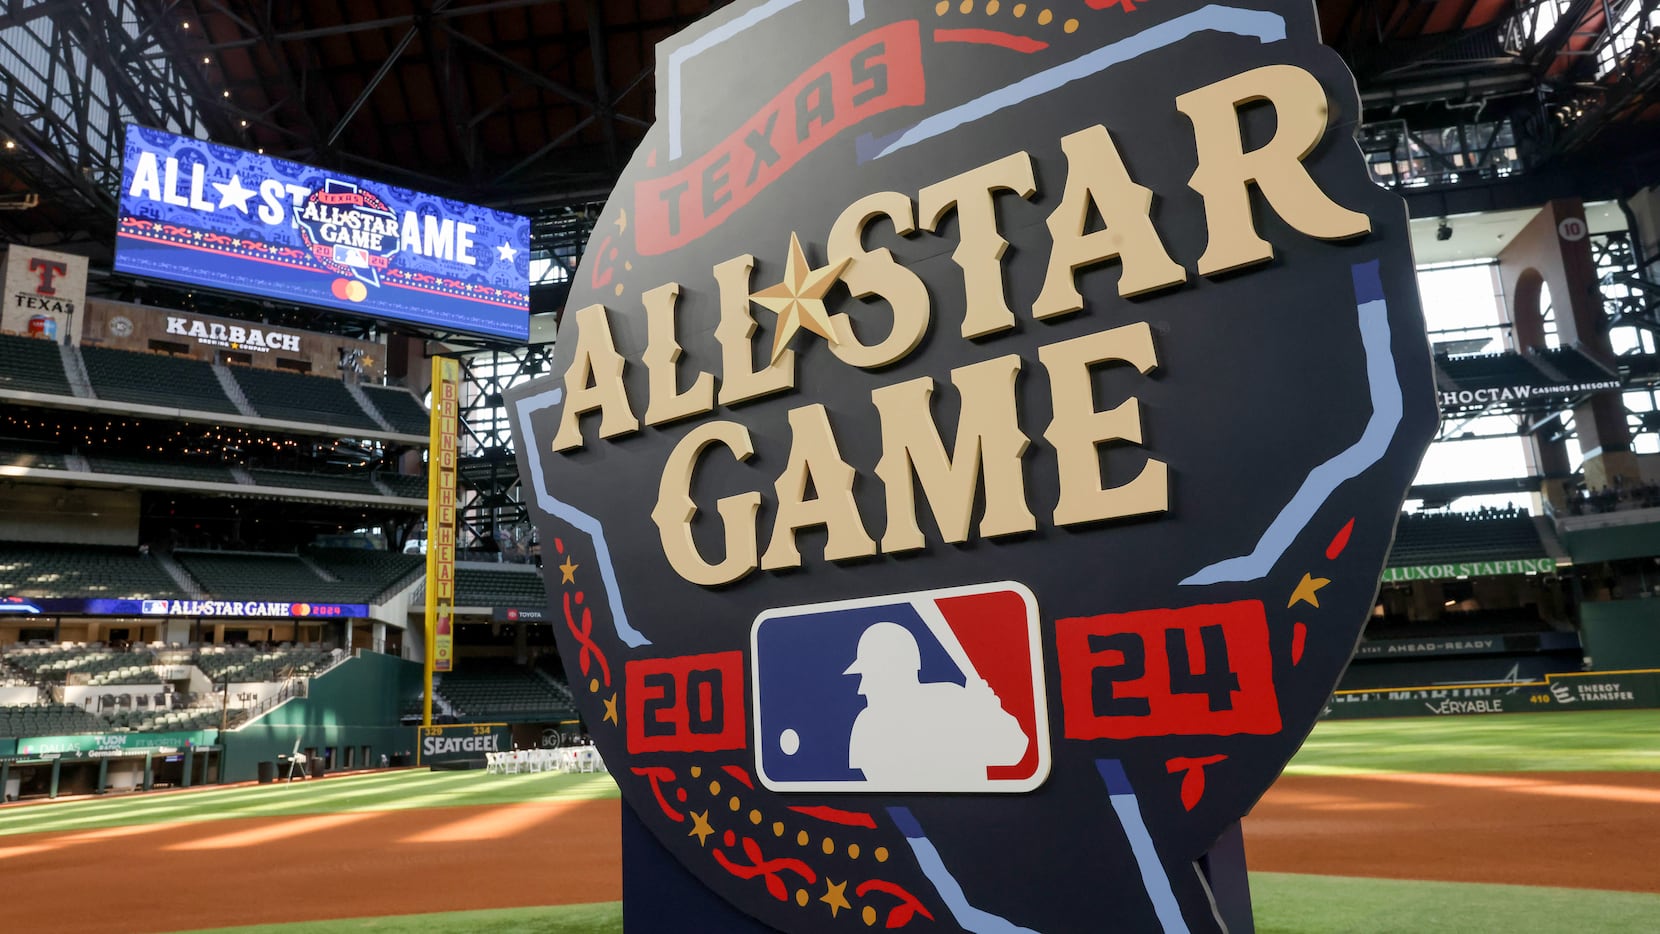 2021 MLB All-Star Game Uniforms Unveiled, Worn In-Game for First